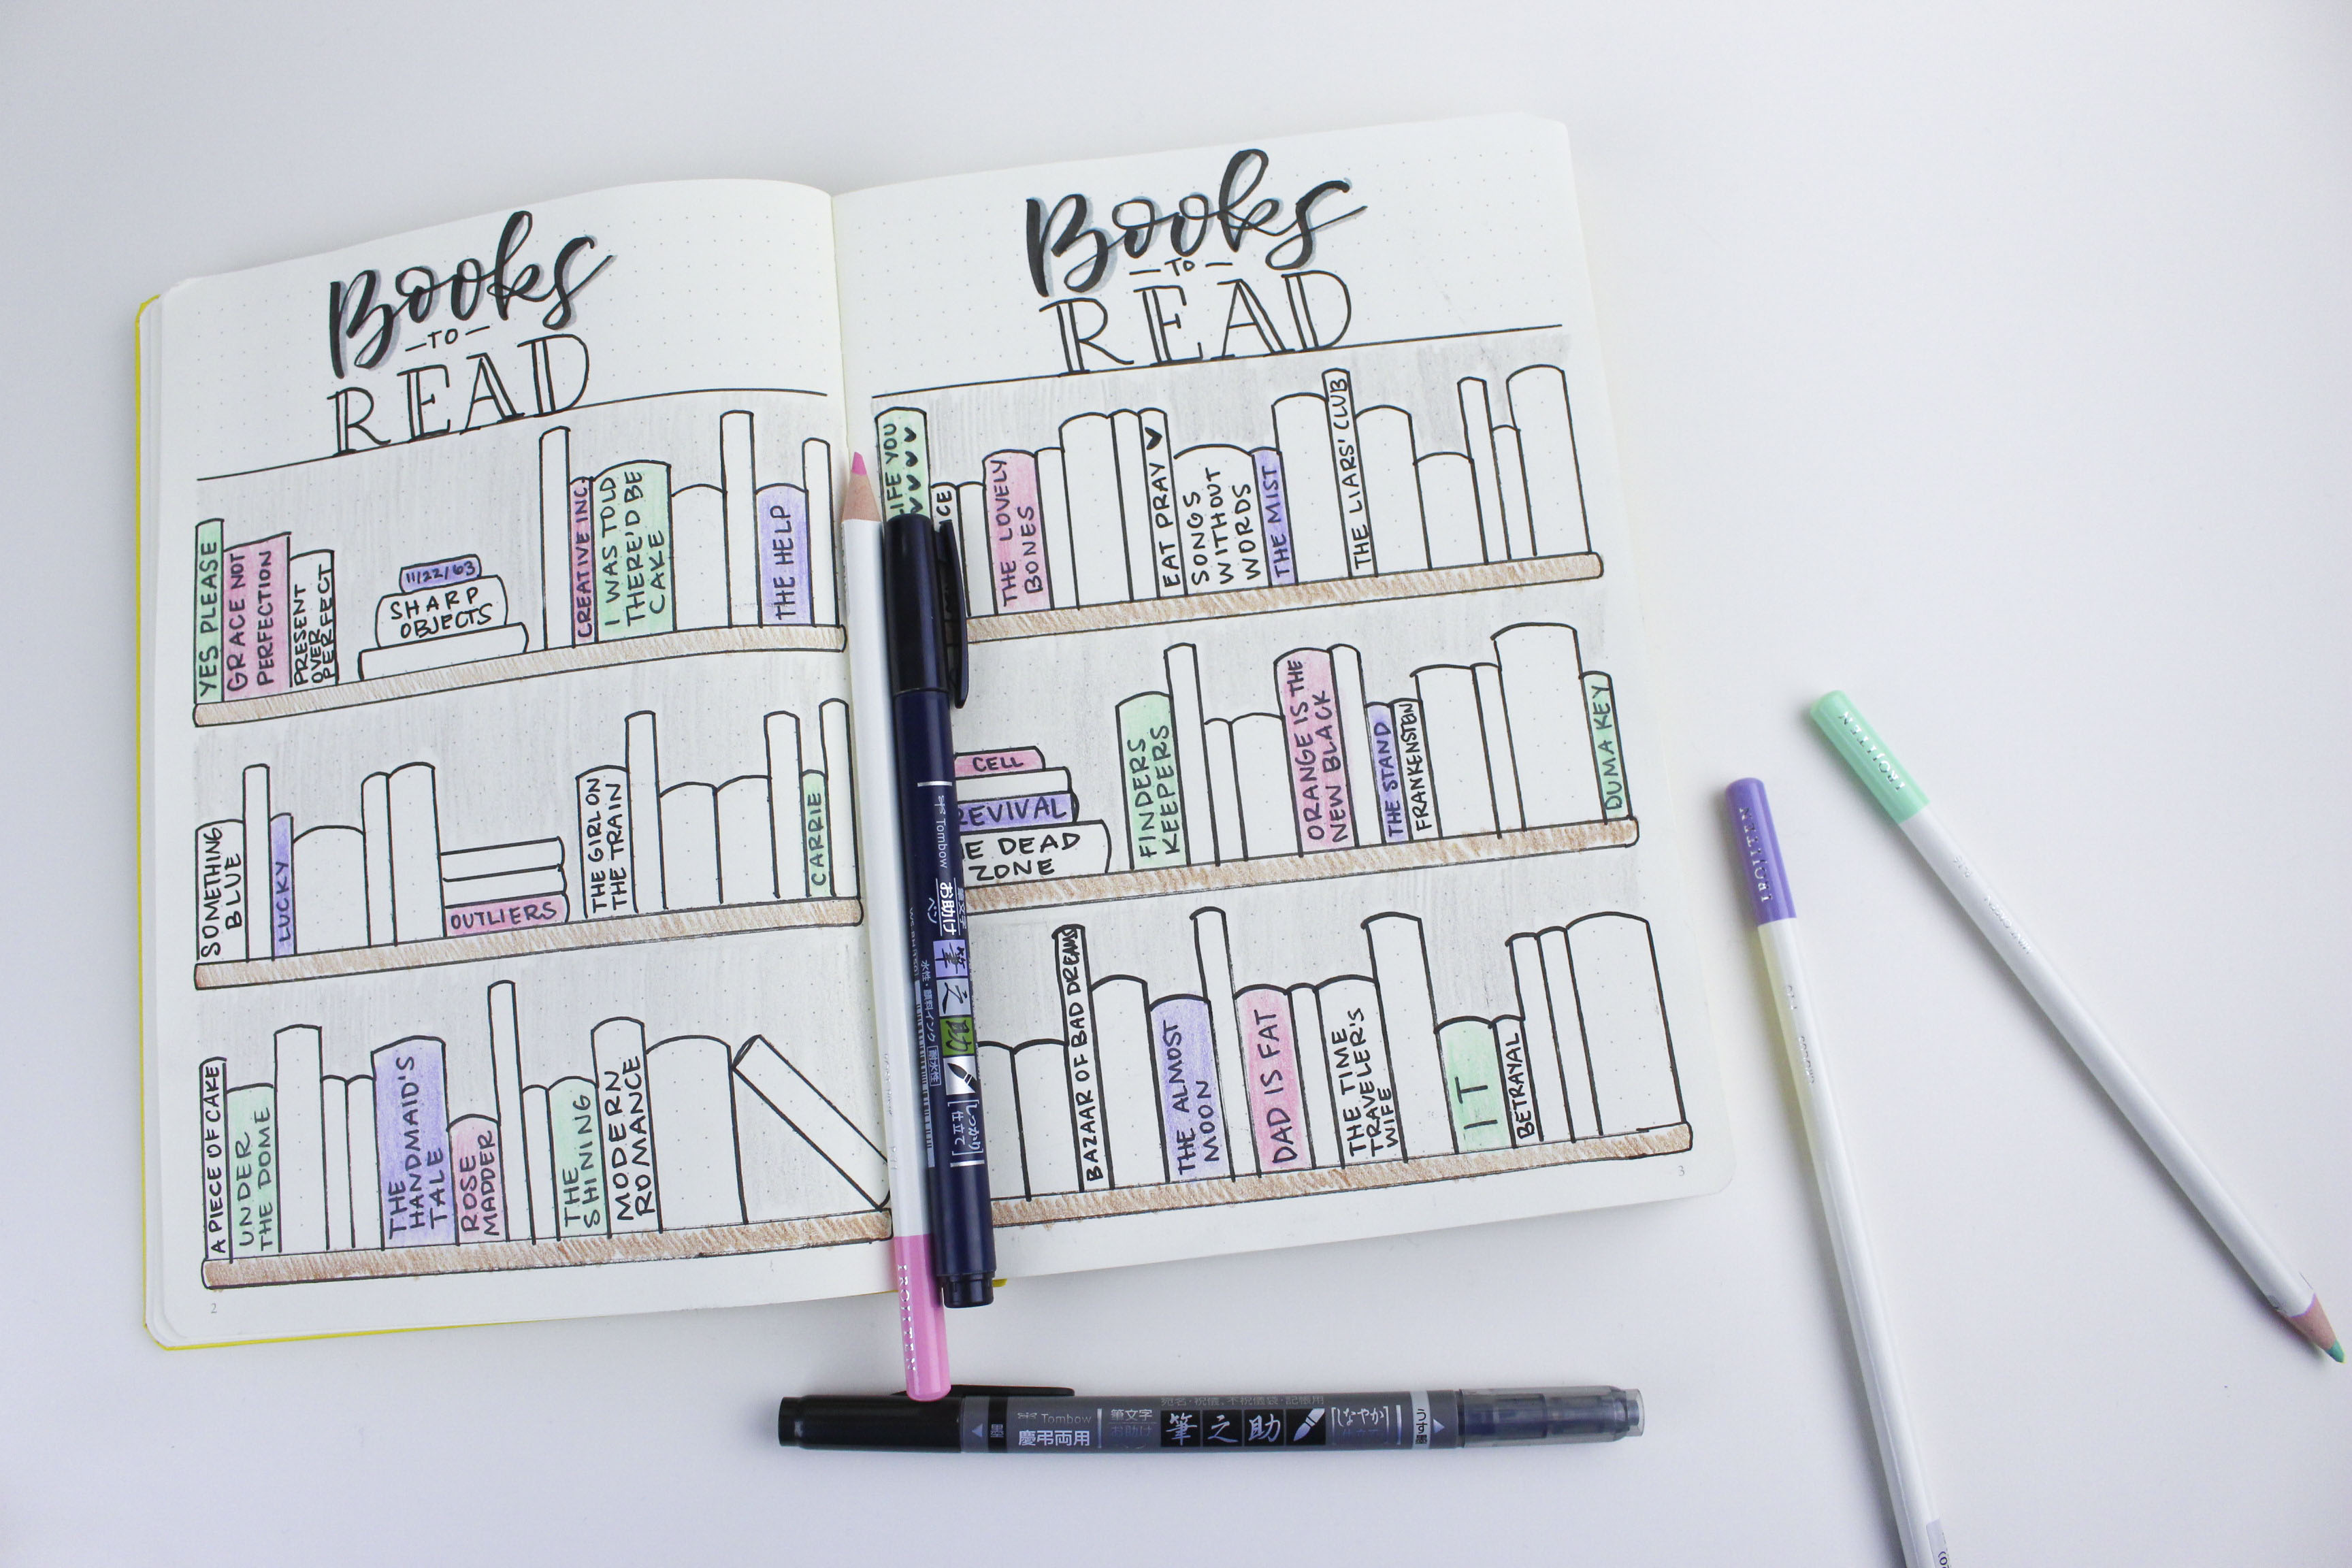 Bullet Journal Layout With New Dual Brush Pens - Tombow USA Blog